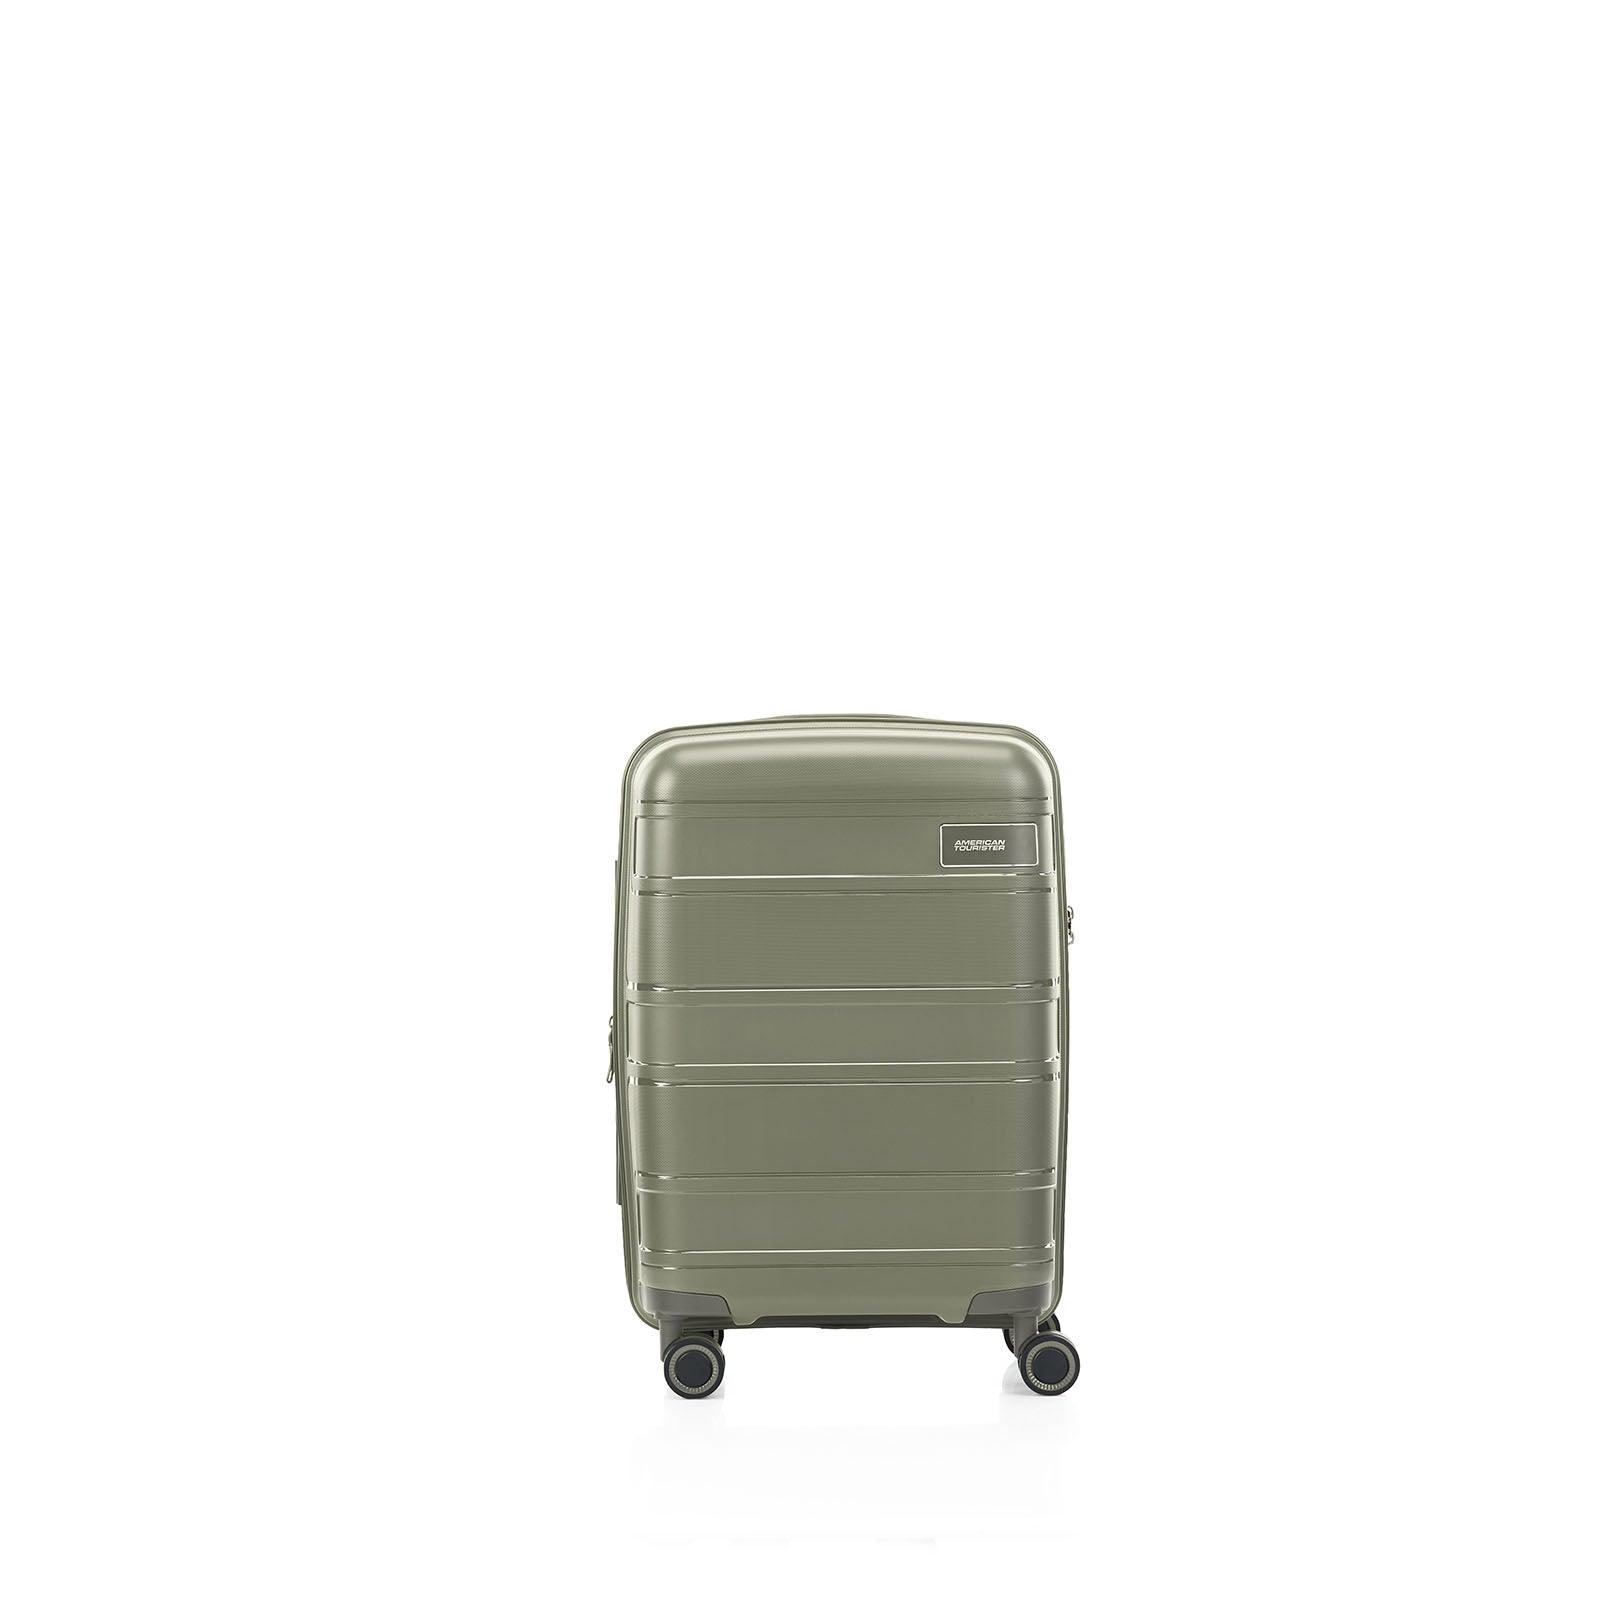 American-Tourister-Light-Max-55cm-Carry-On-Suitcase-Khaki-Front